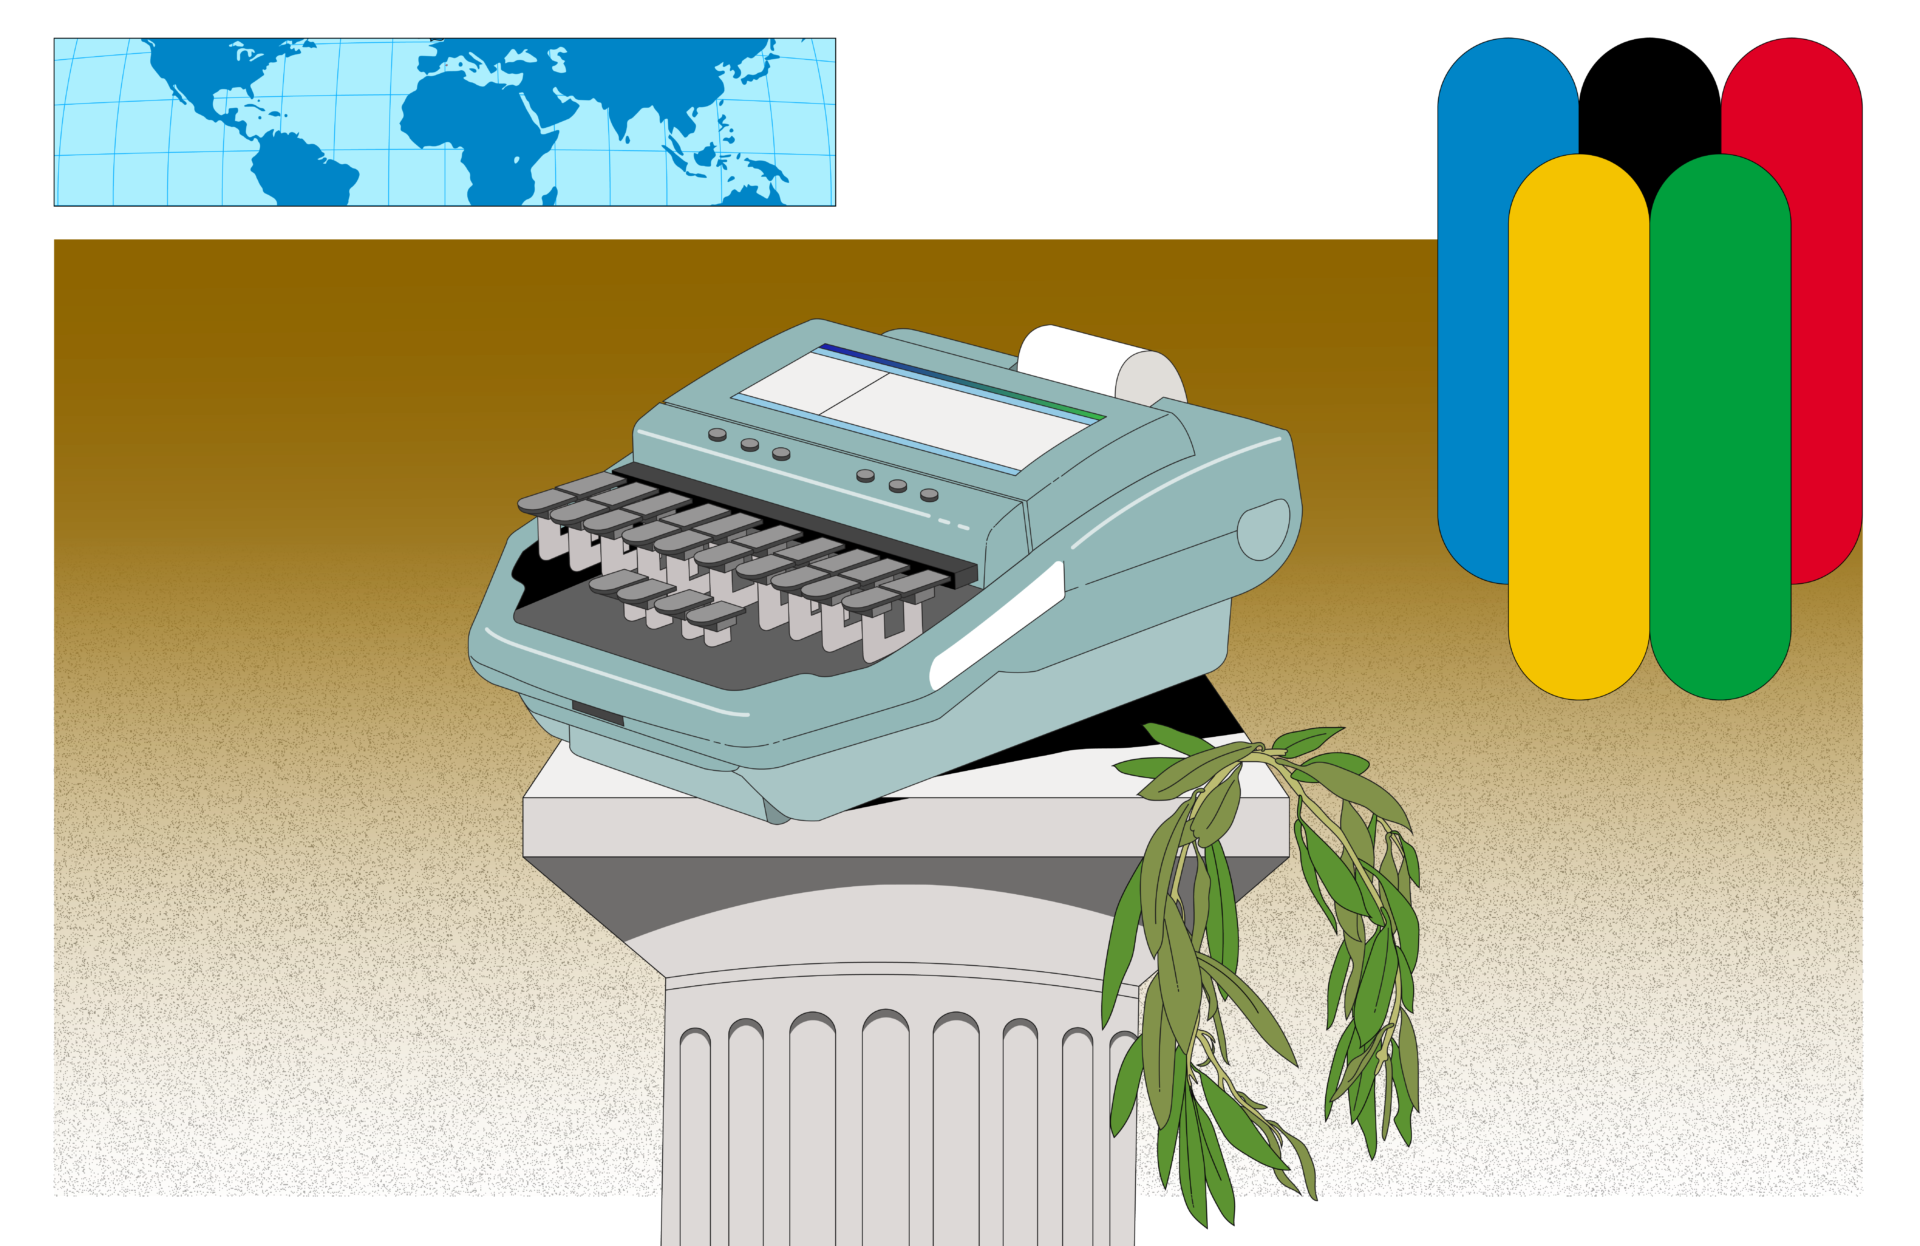 An illustration of a stenograph machine on a Roman column. The Olympic colours are in one corner and a world map in the other.